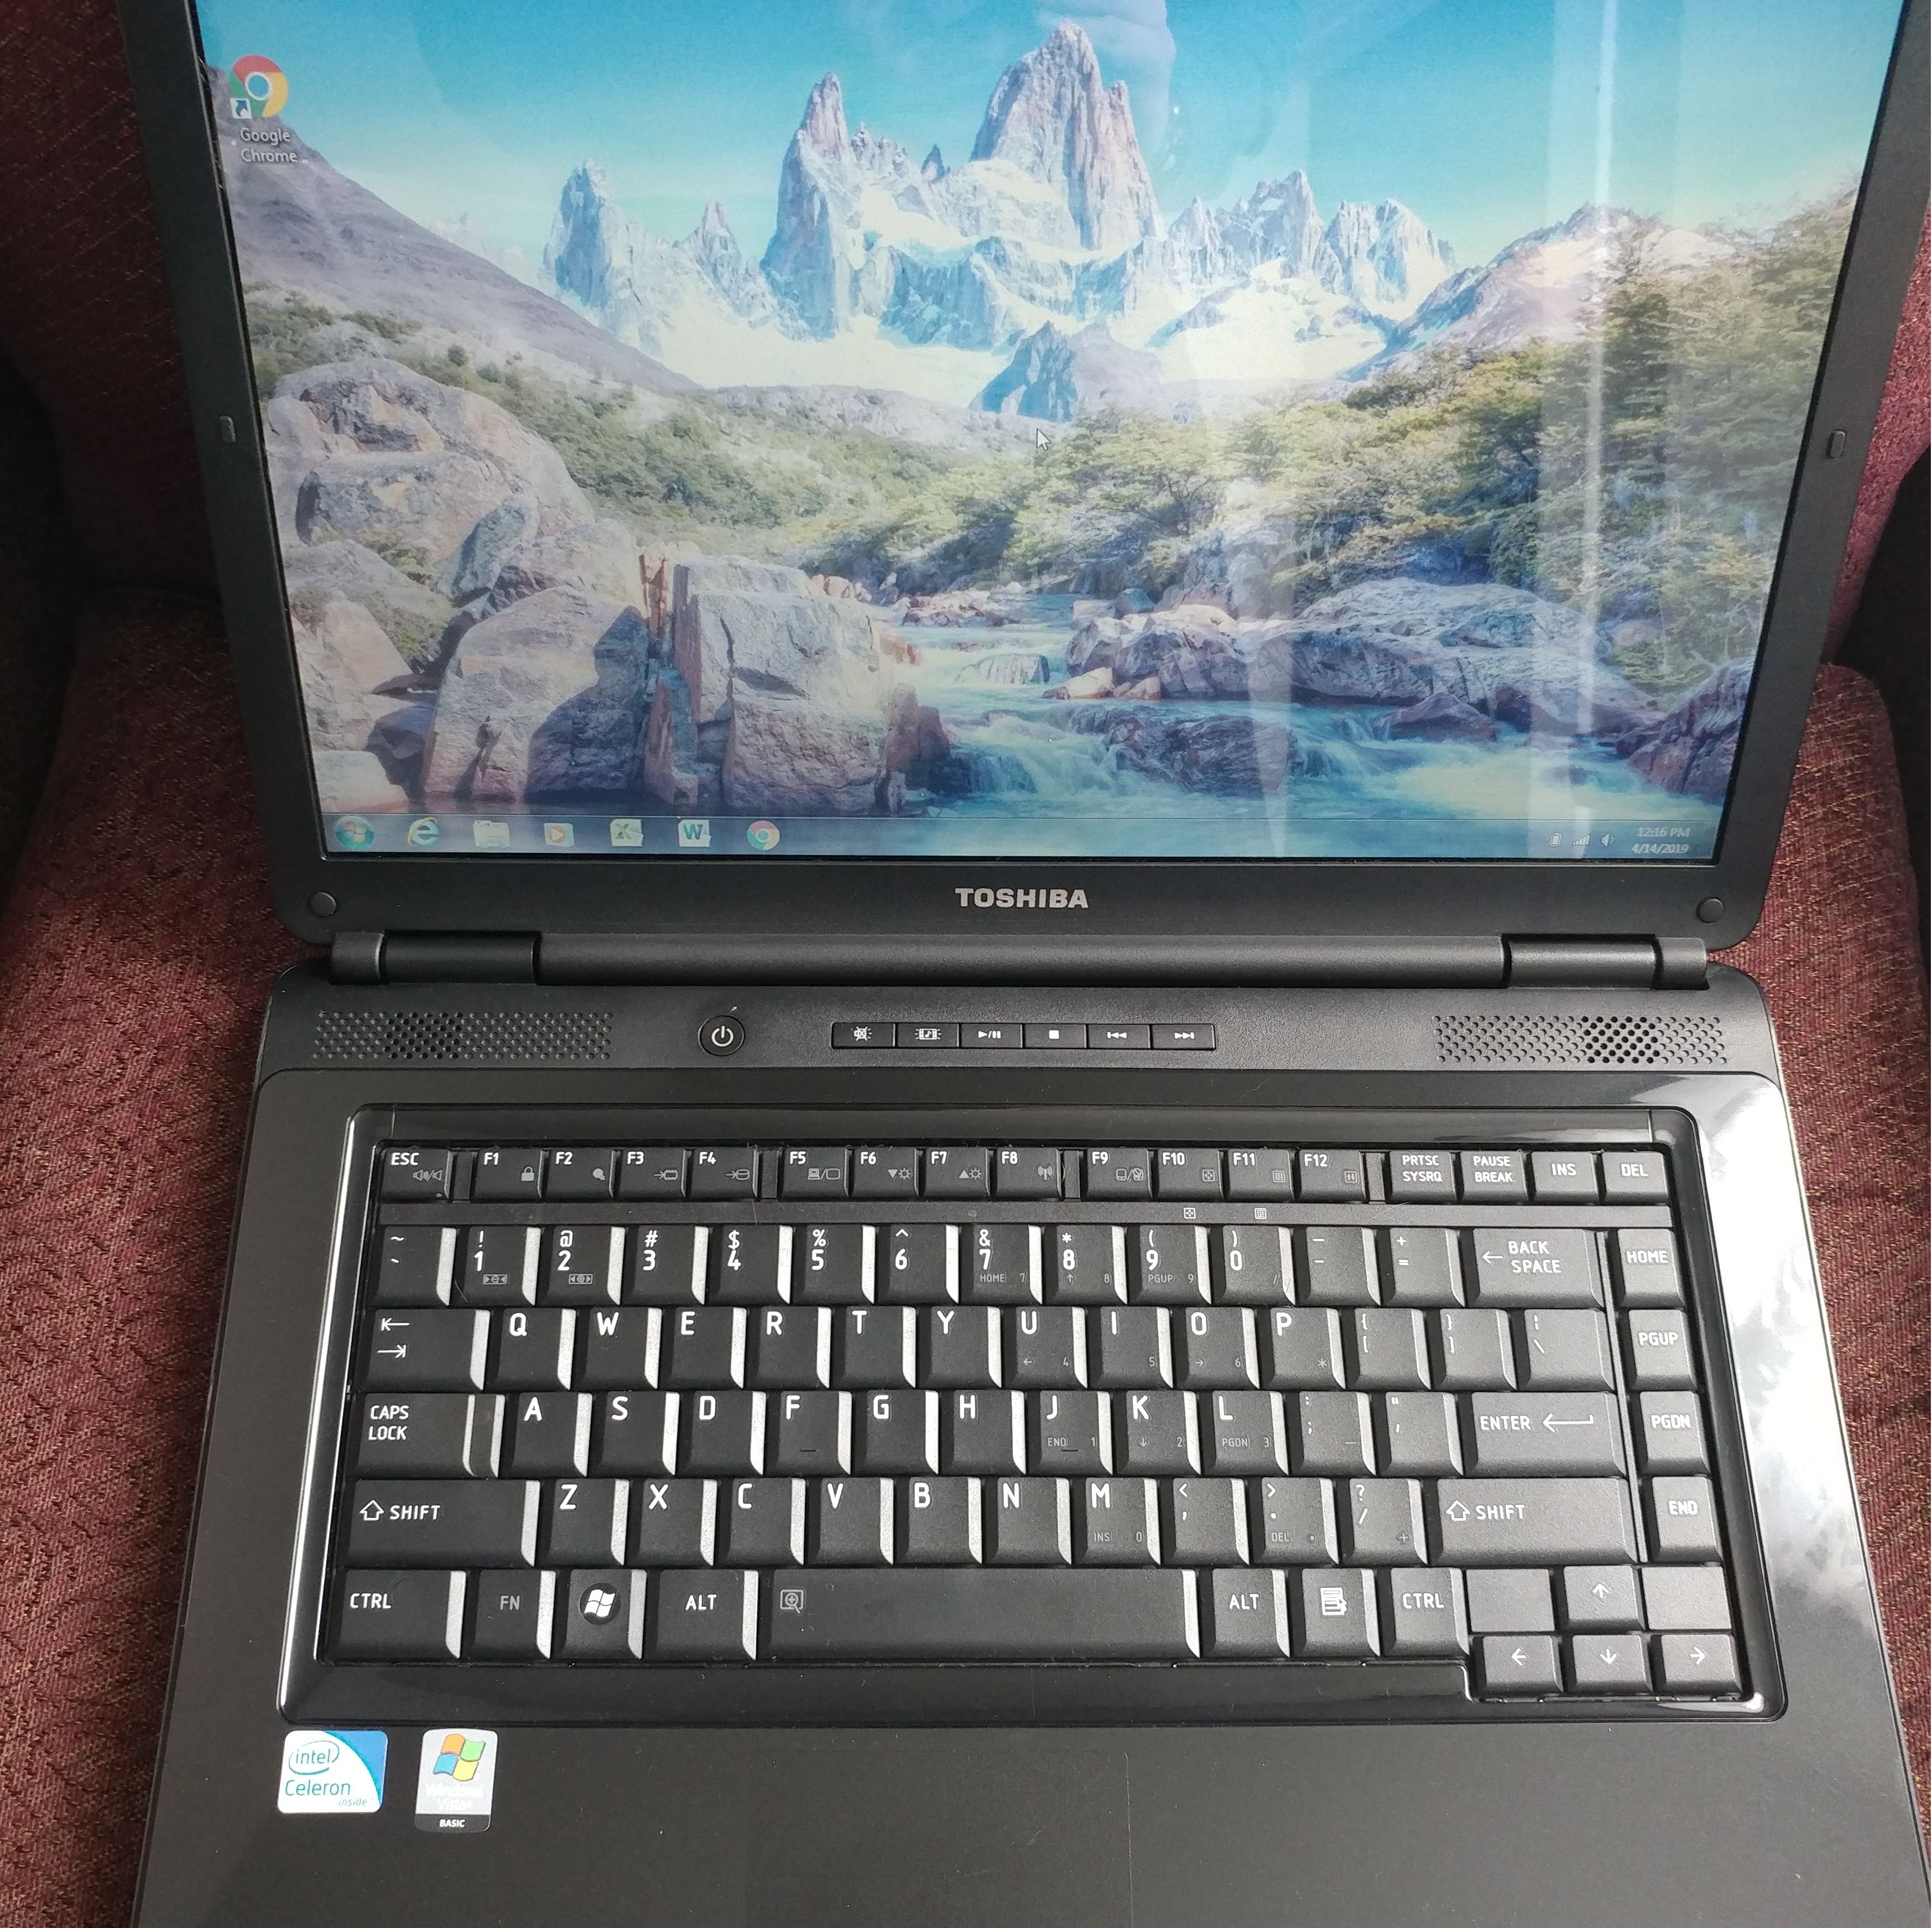 Laptop Toshiba, Excellent condition, Intel 2.5 Ghz, 4 GB RAM, 320 GB HD, NEW charger, good battery, Win, Office.